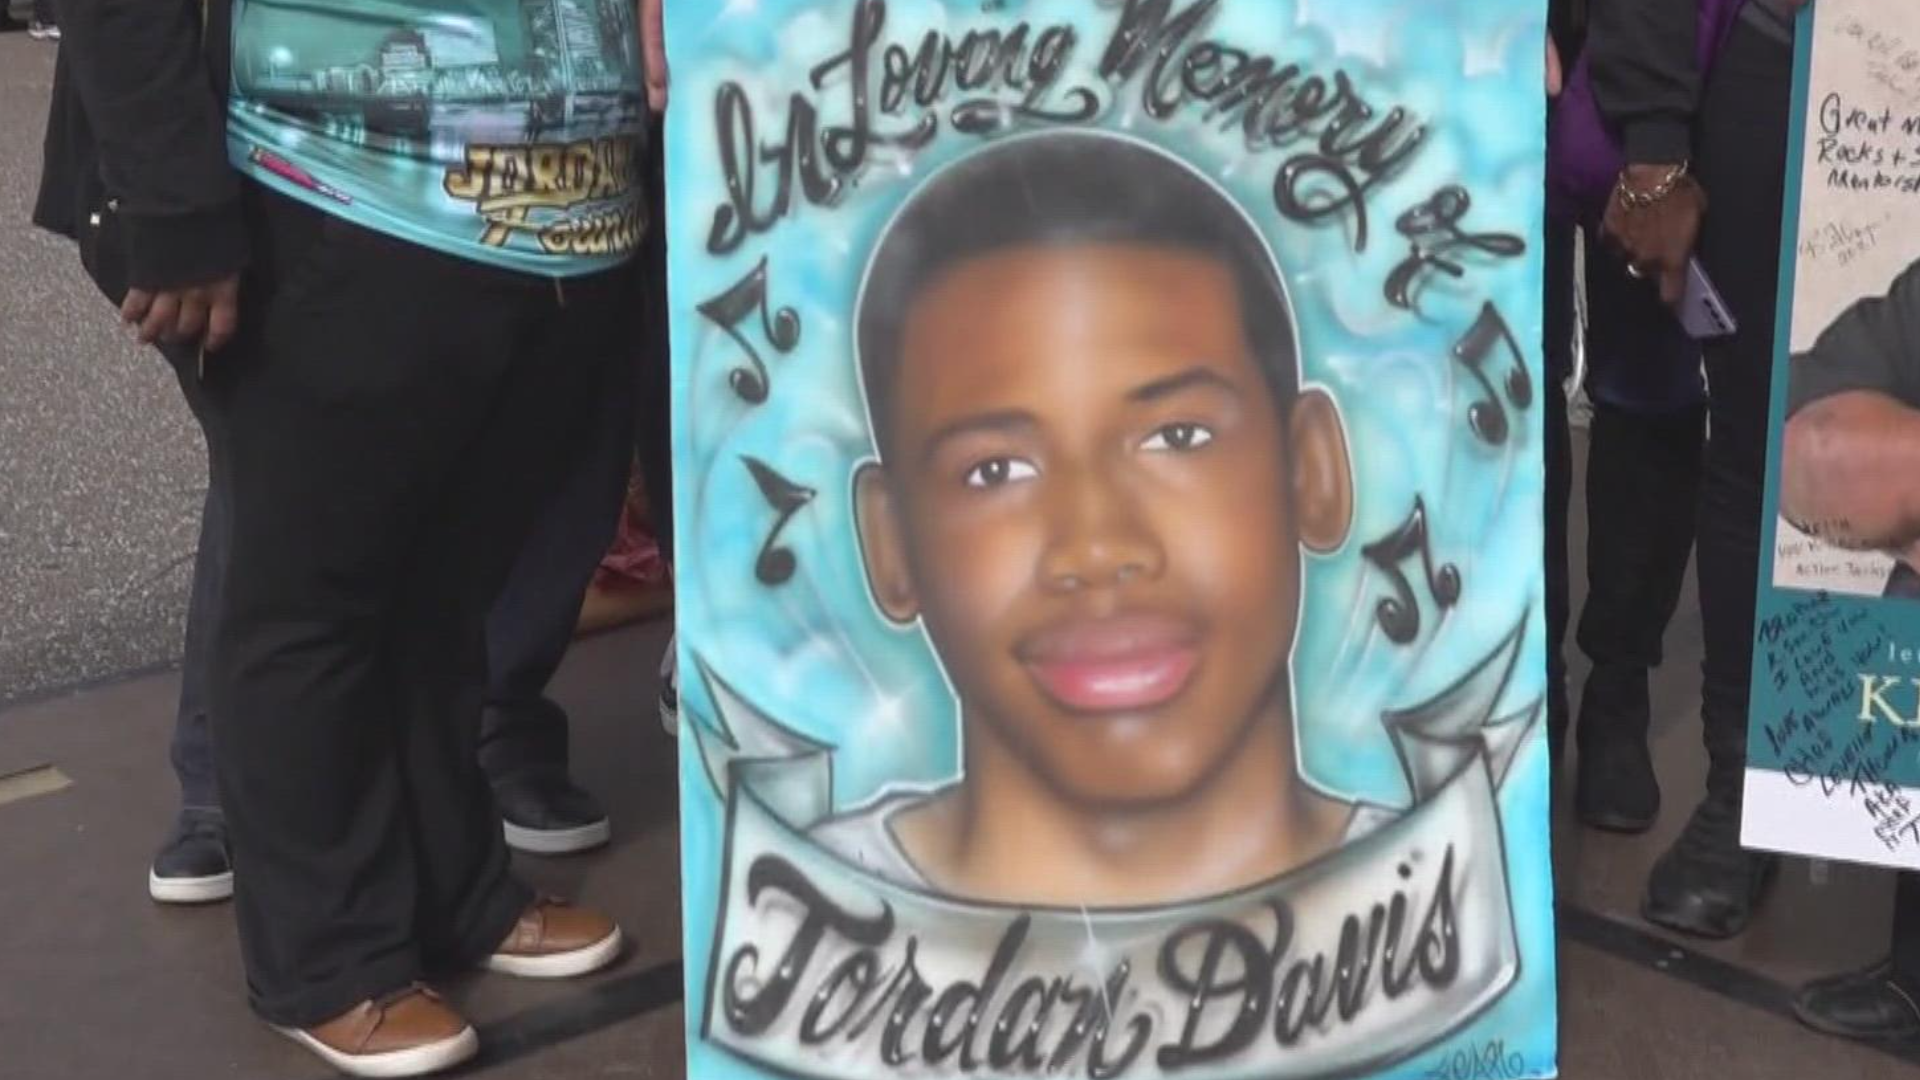 The event not only fed those in need, but also honored the life of Jordan Davis, a 17-year-old killed at a Southside gas station over loud music 10 years ago.